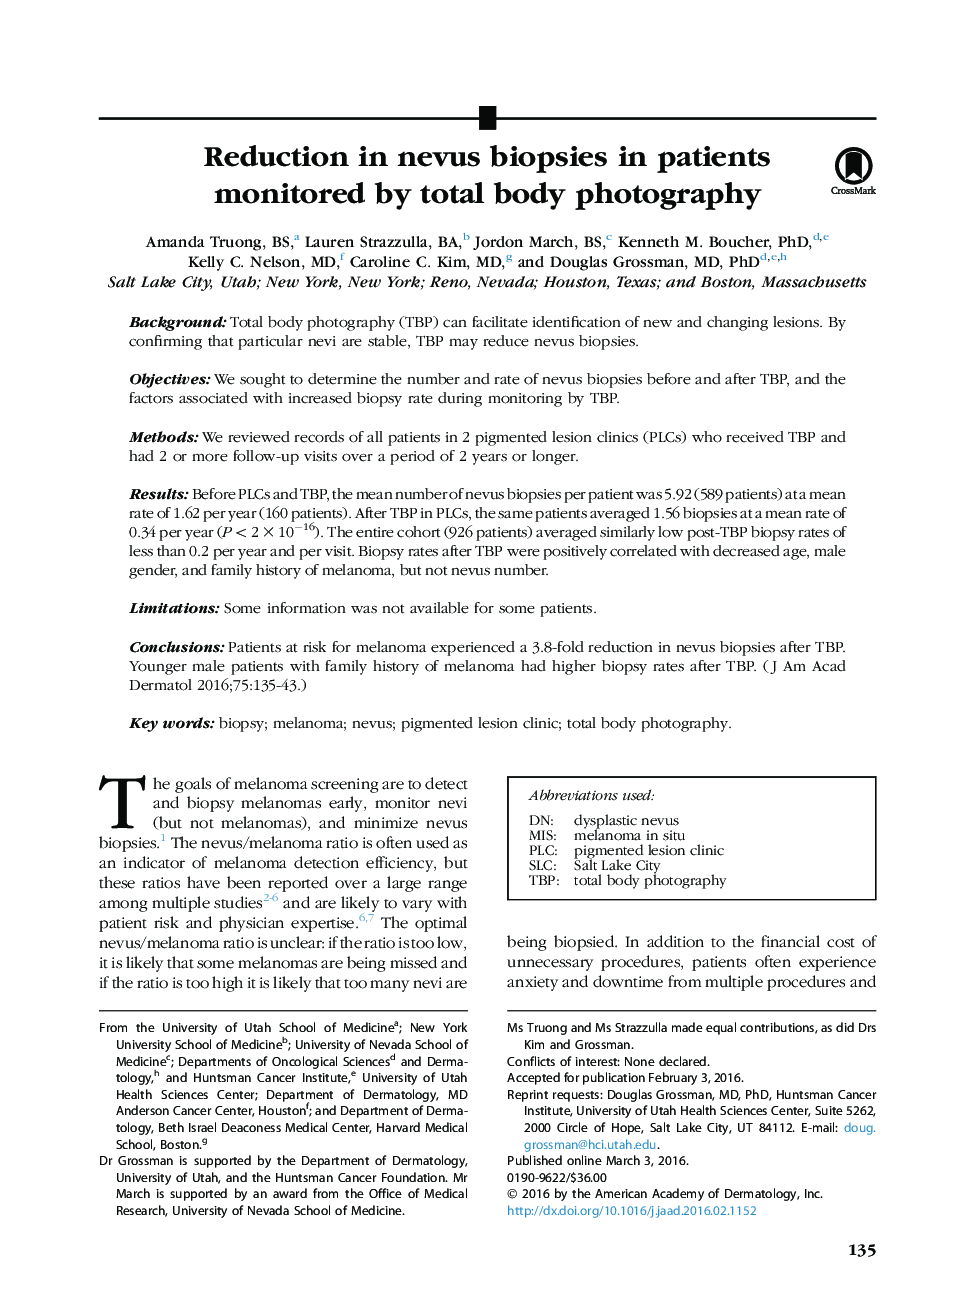 Original articleReduction in nevus biopsies in patients monitored by total body photography